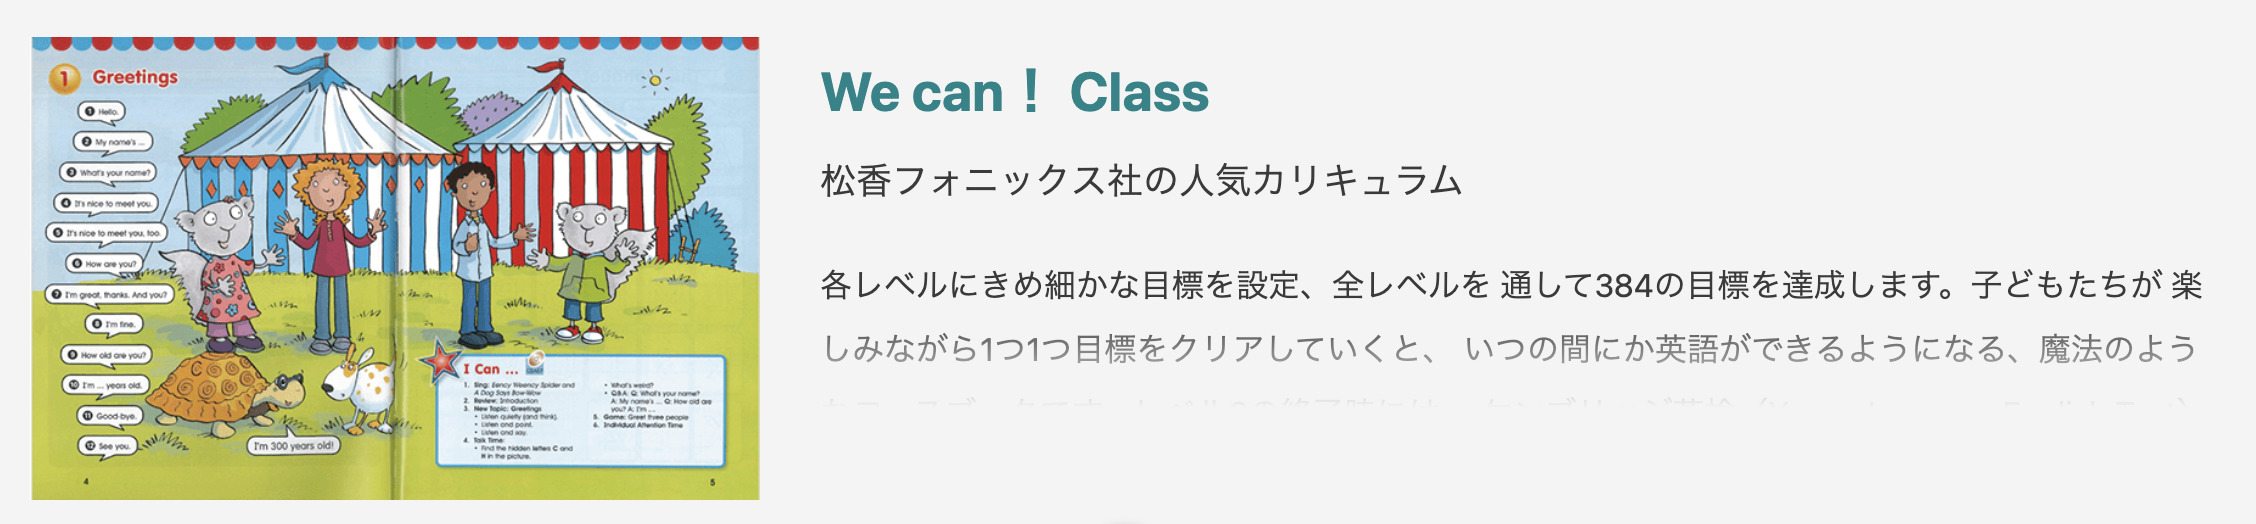 QQキッズ We can！ Class